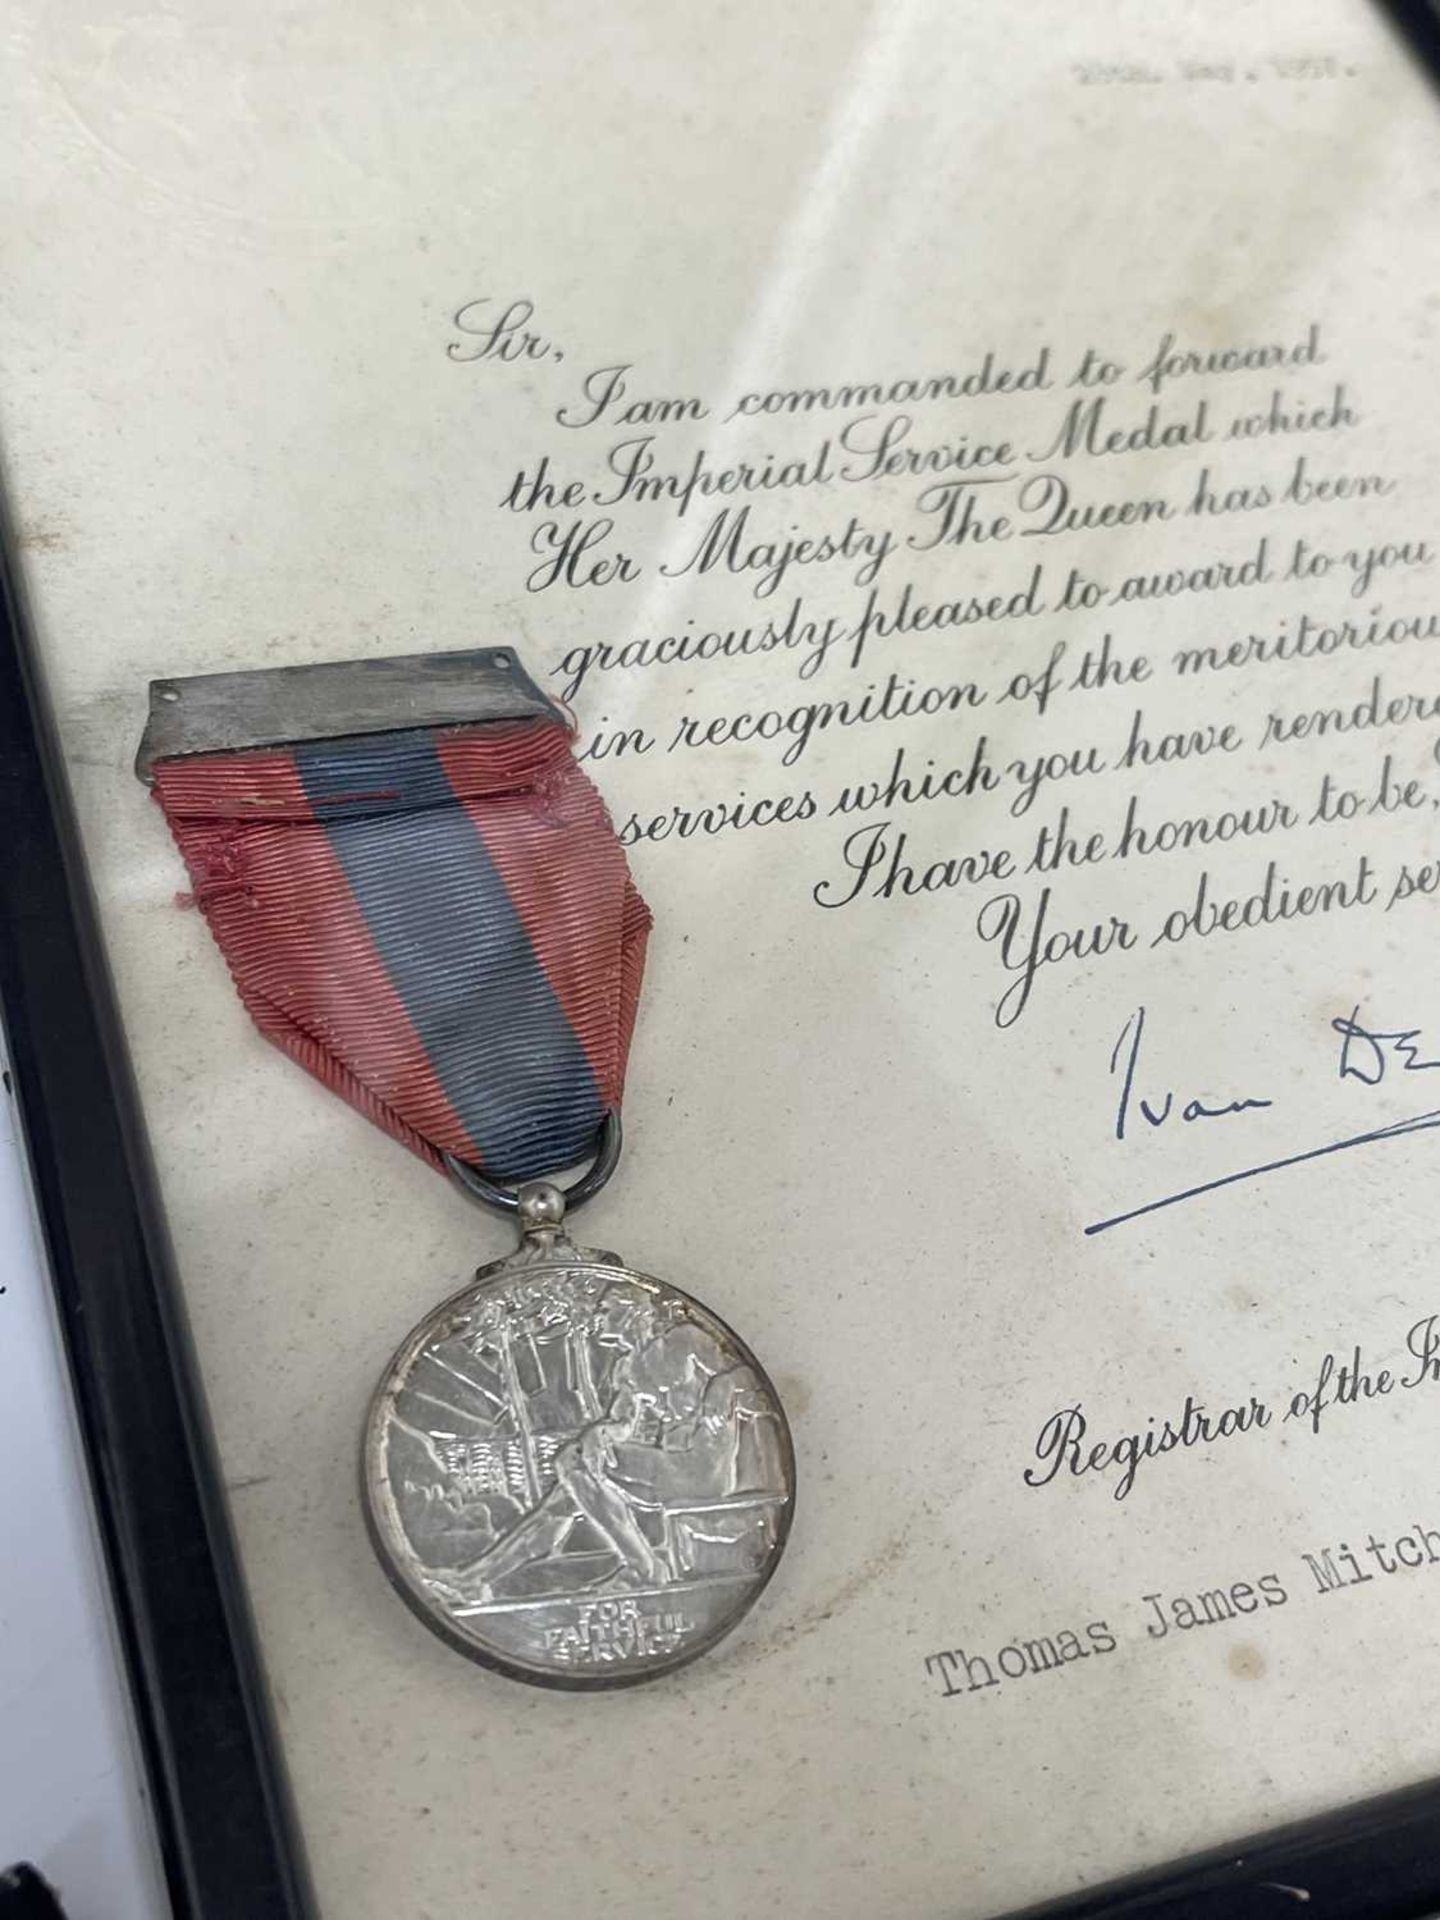 Penzance, Cornwall Interest. Lot comprises a framed and glazed silver Imperial Service Medal with - Image 4 of 6